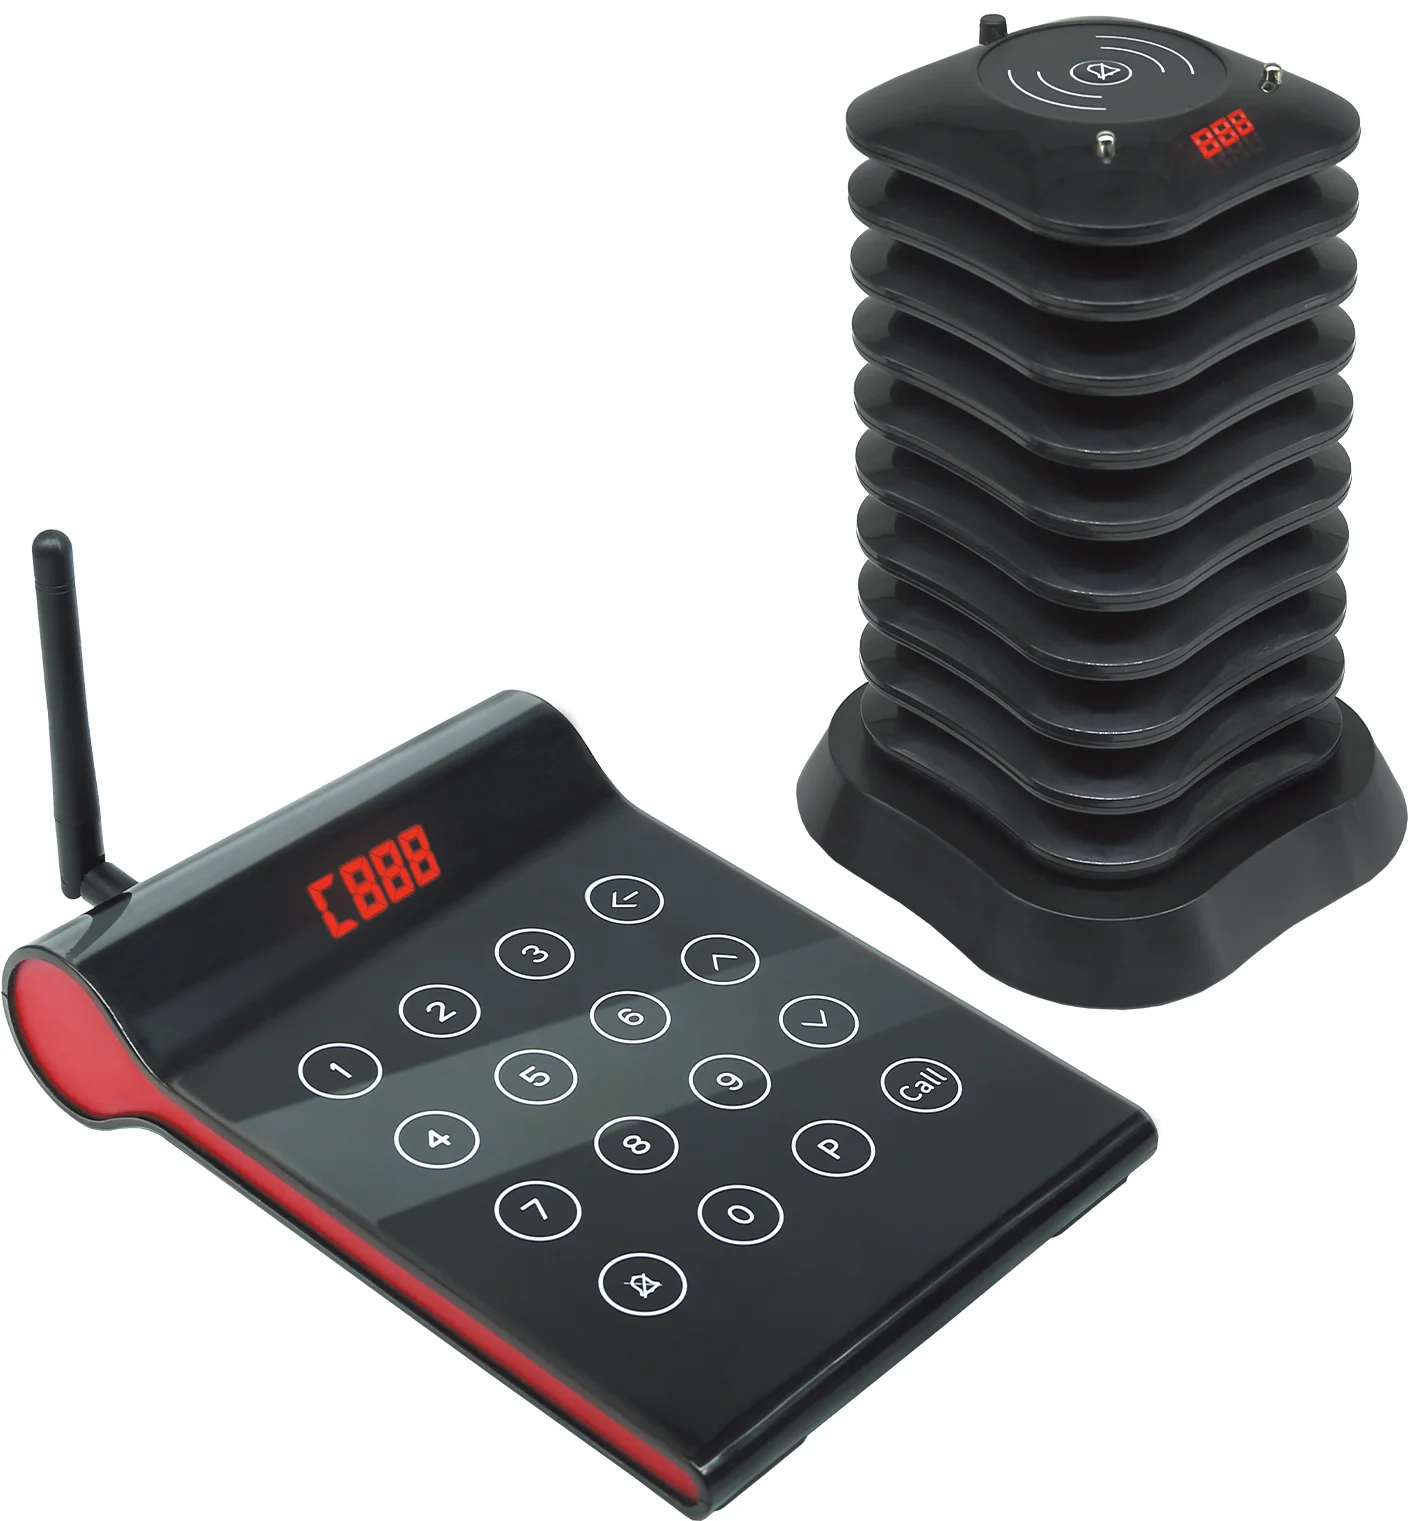 

KL-QC08 LED Display restaurant wireless paging system restaurant calling system waiter call pager